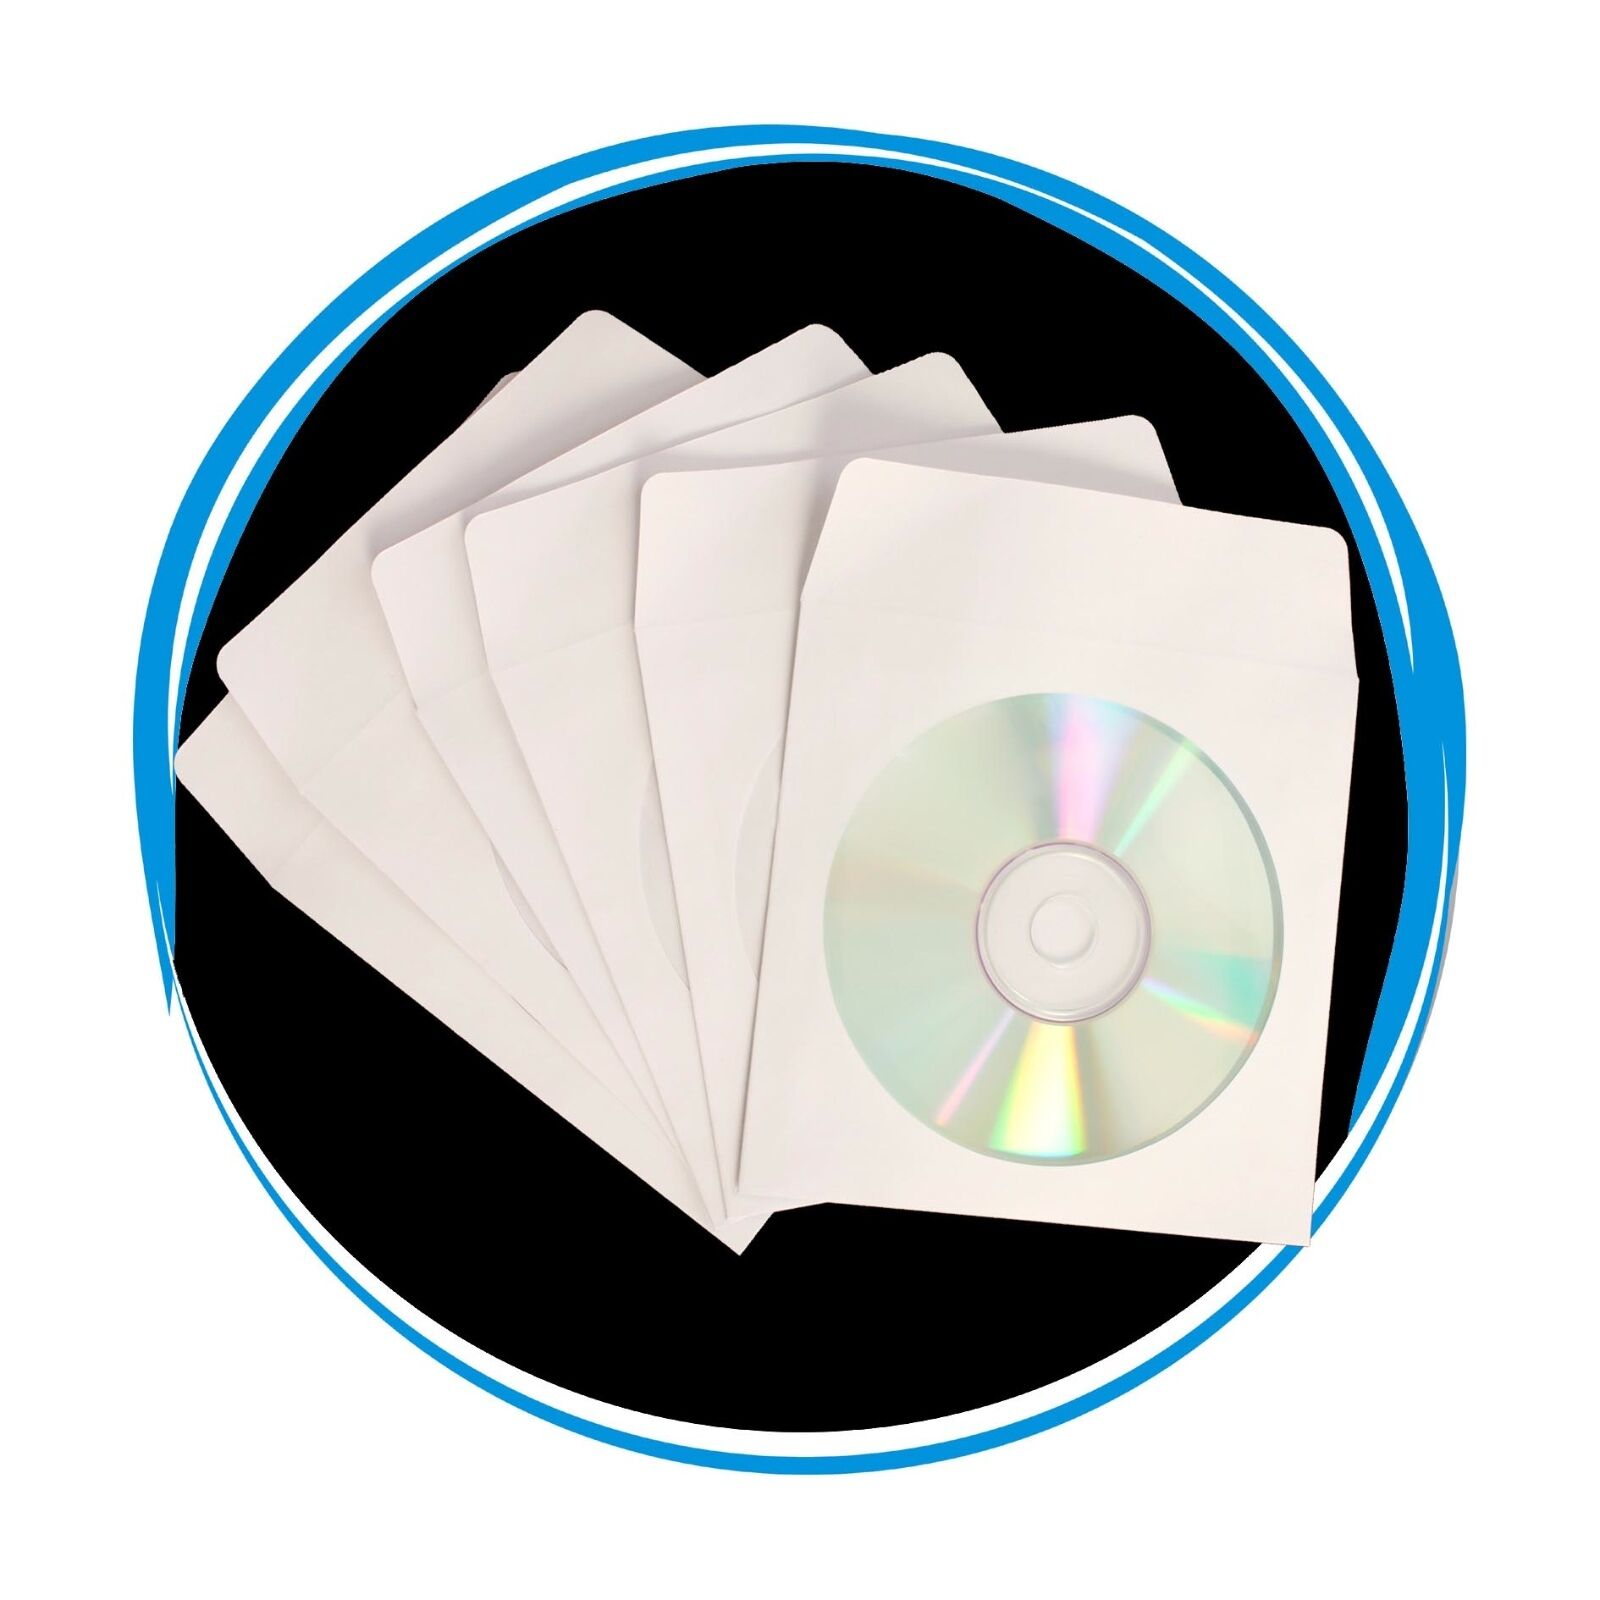 500 Cd Dvd R Paper Sleeve Envelope Window & Flap 80g Free Expedited Shipping